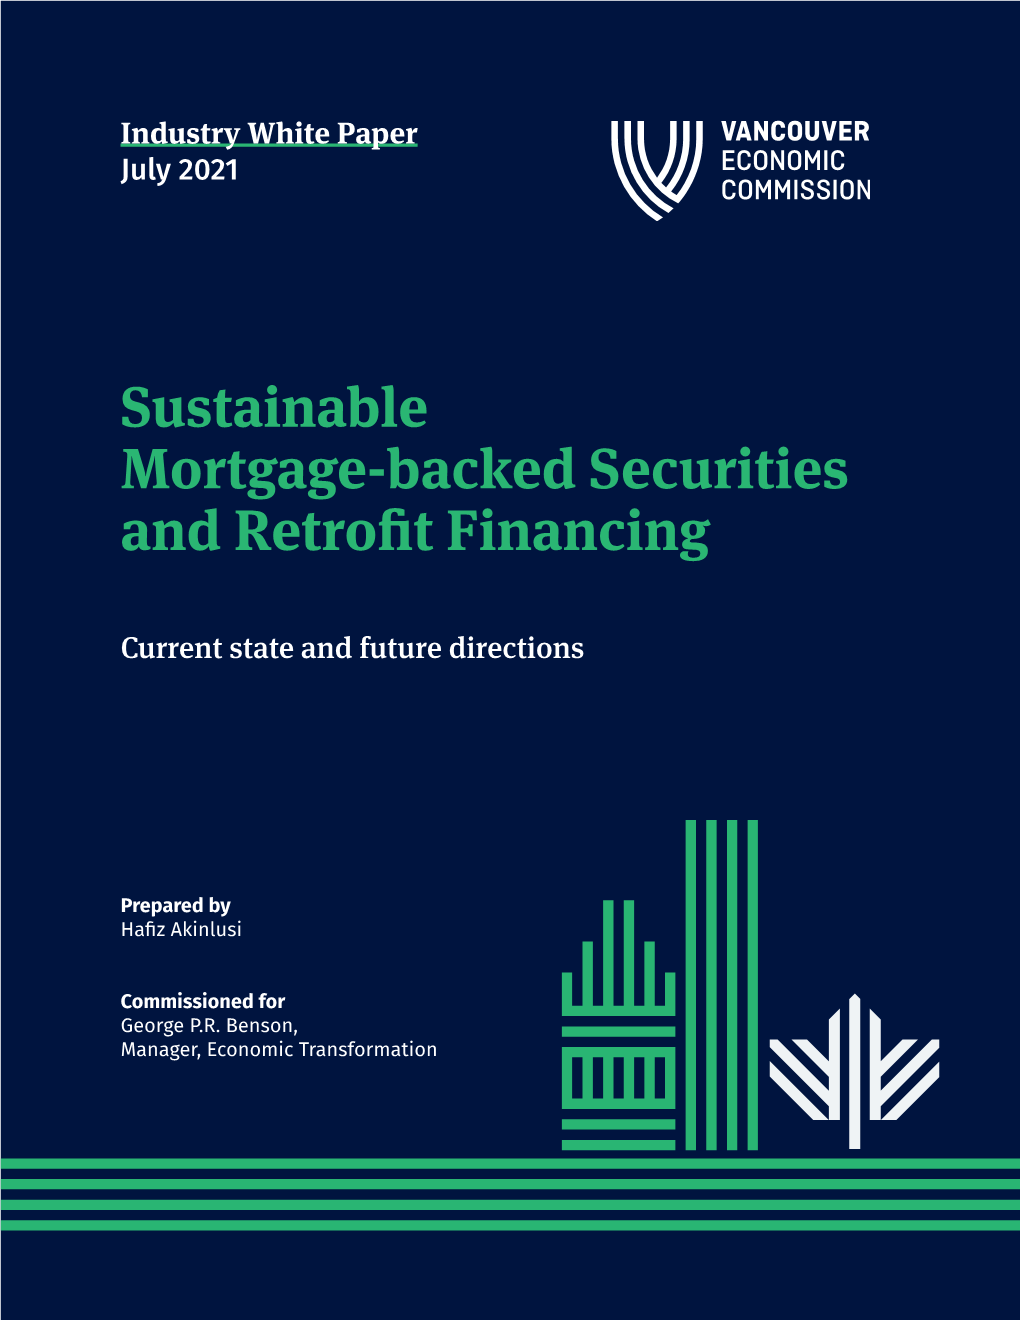 Sustainable Mortgage-Backed Securities and Retrofit Financing